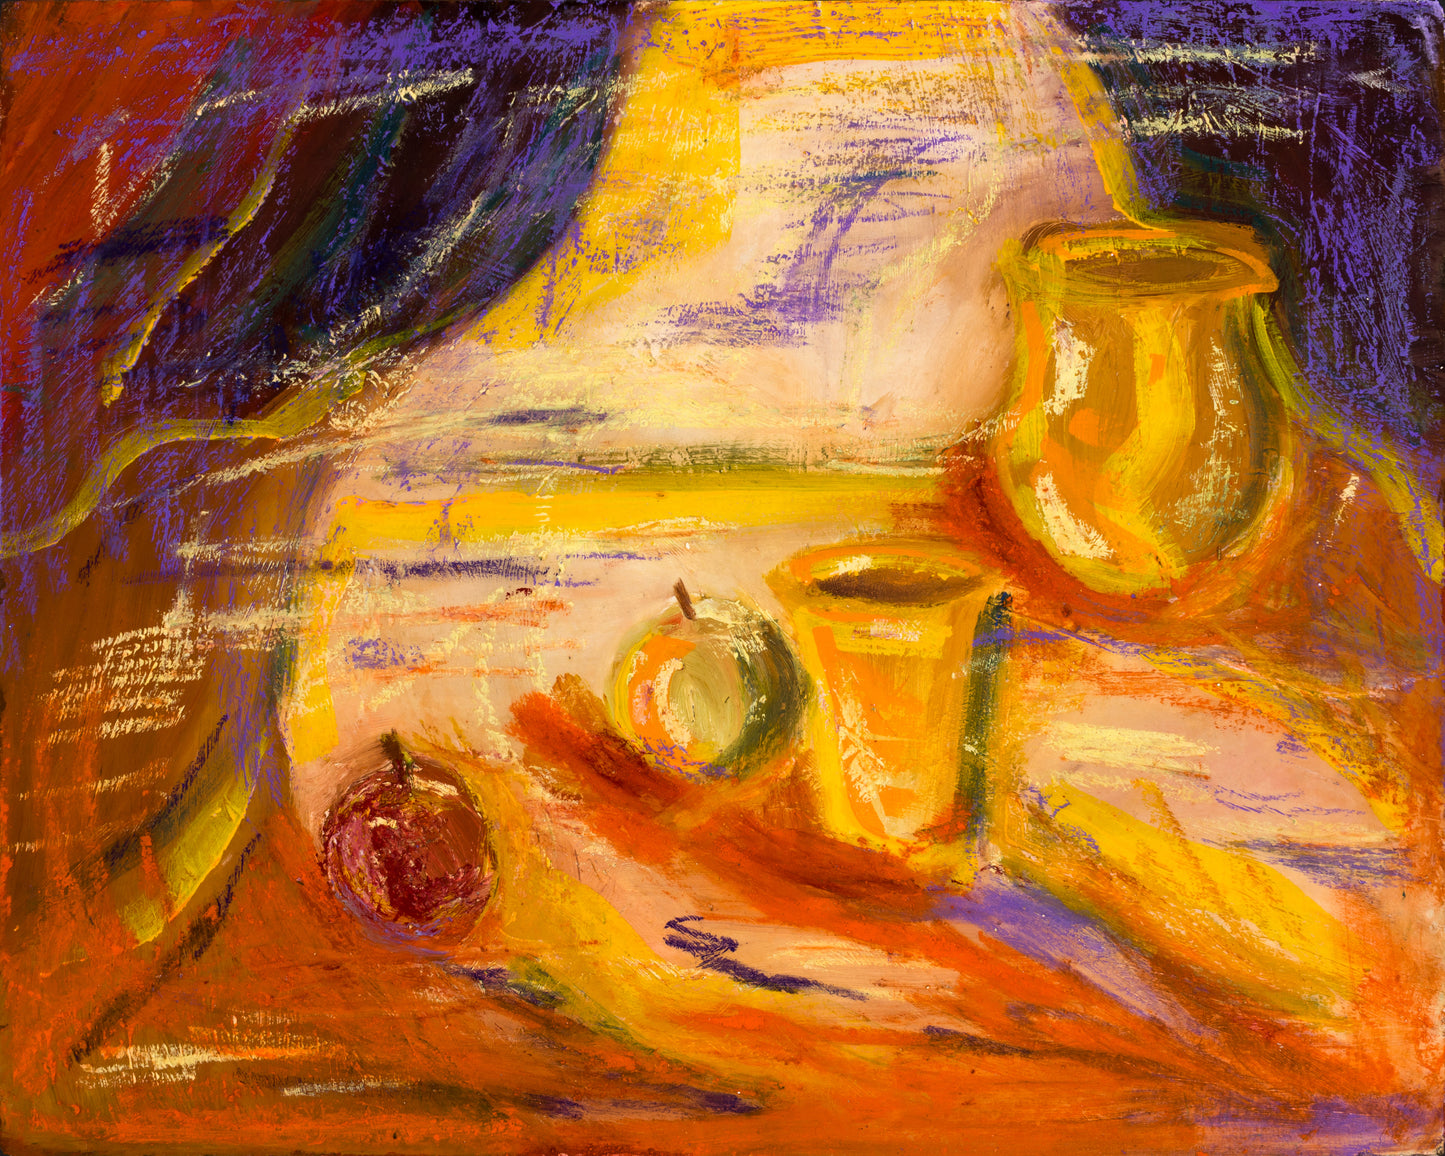 Still Life with Jug and Apples : 16" x 20" - 41 x 50 cm